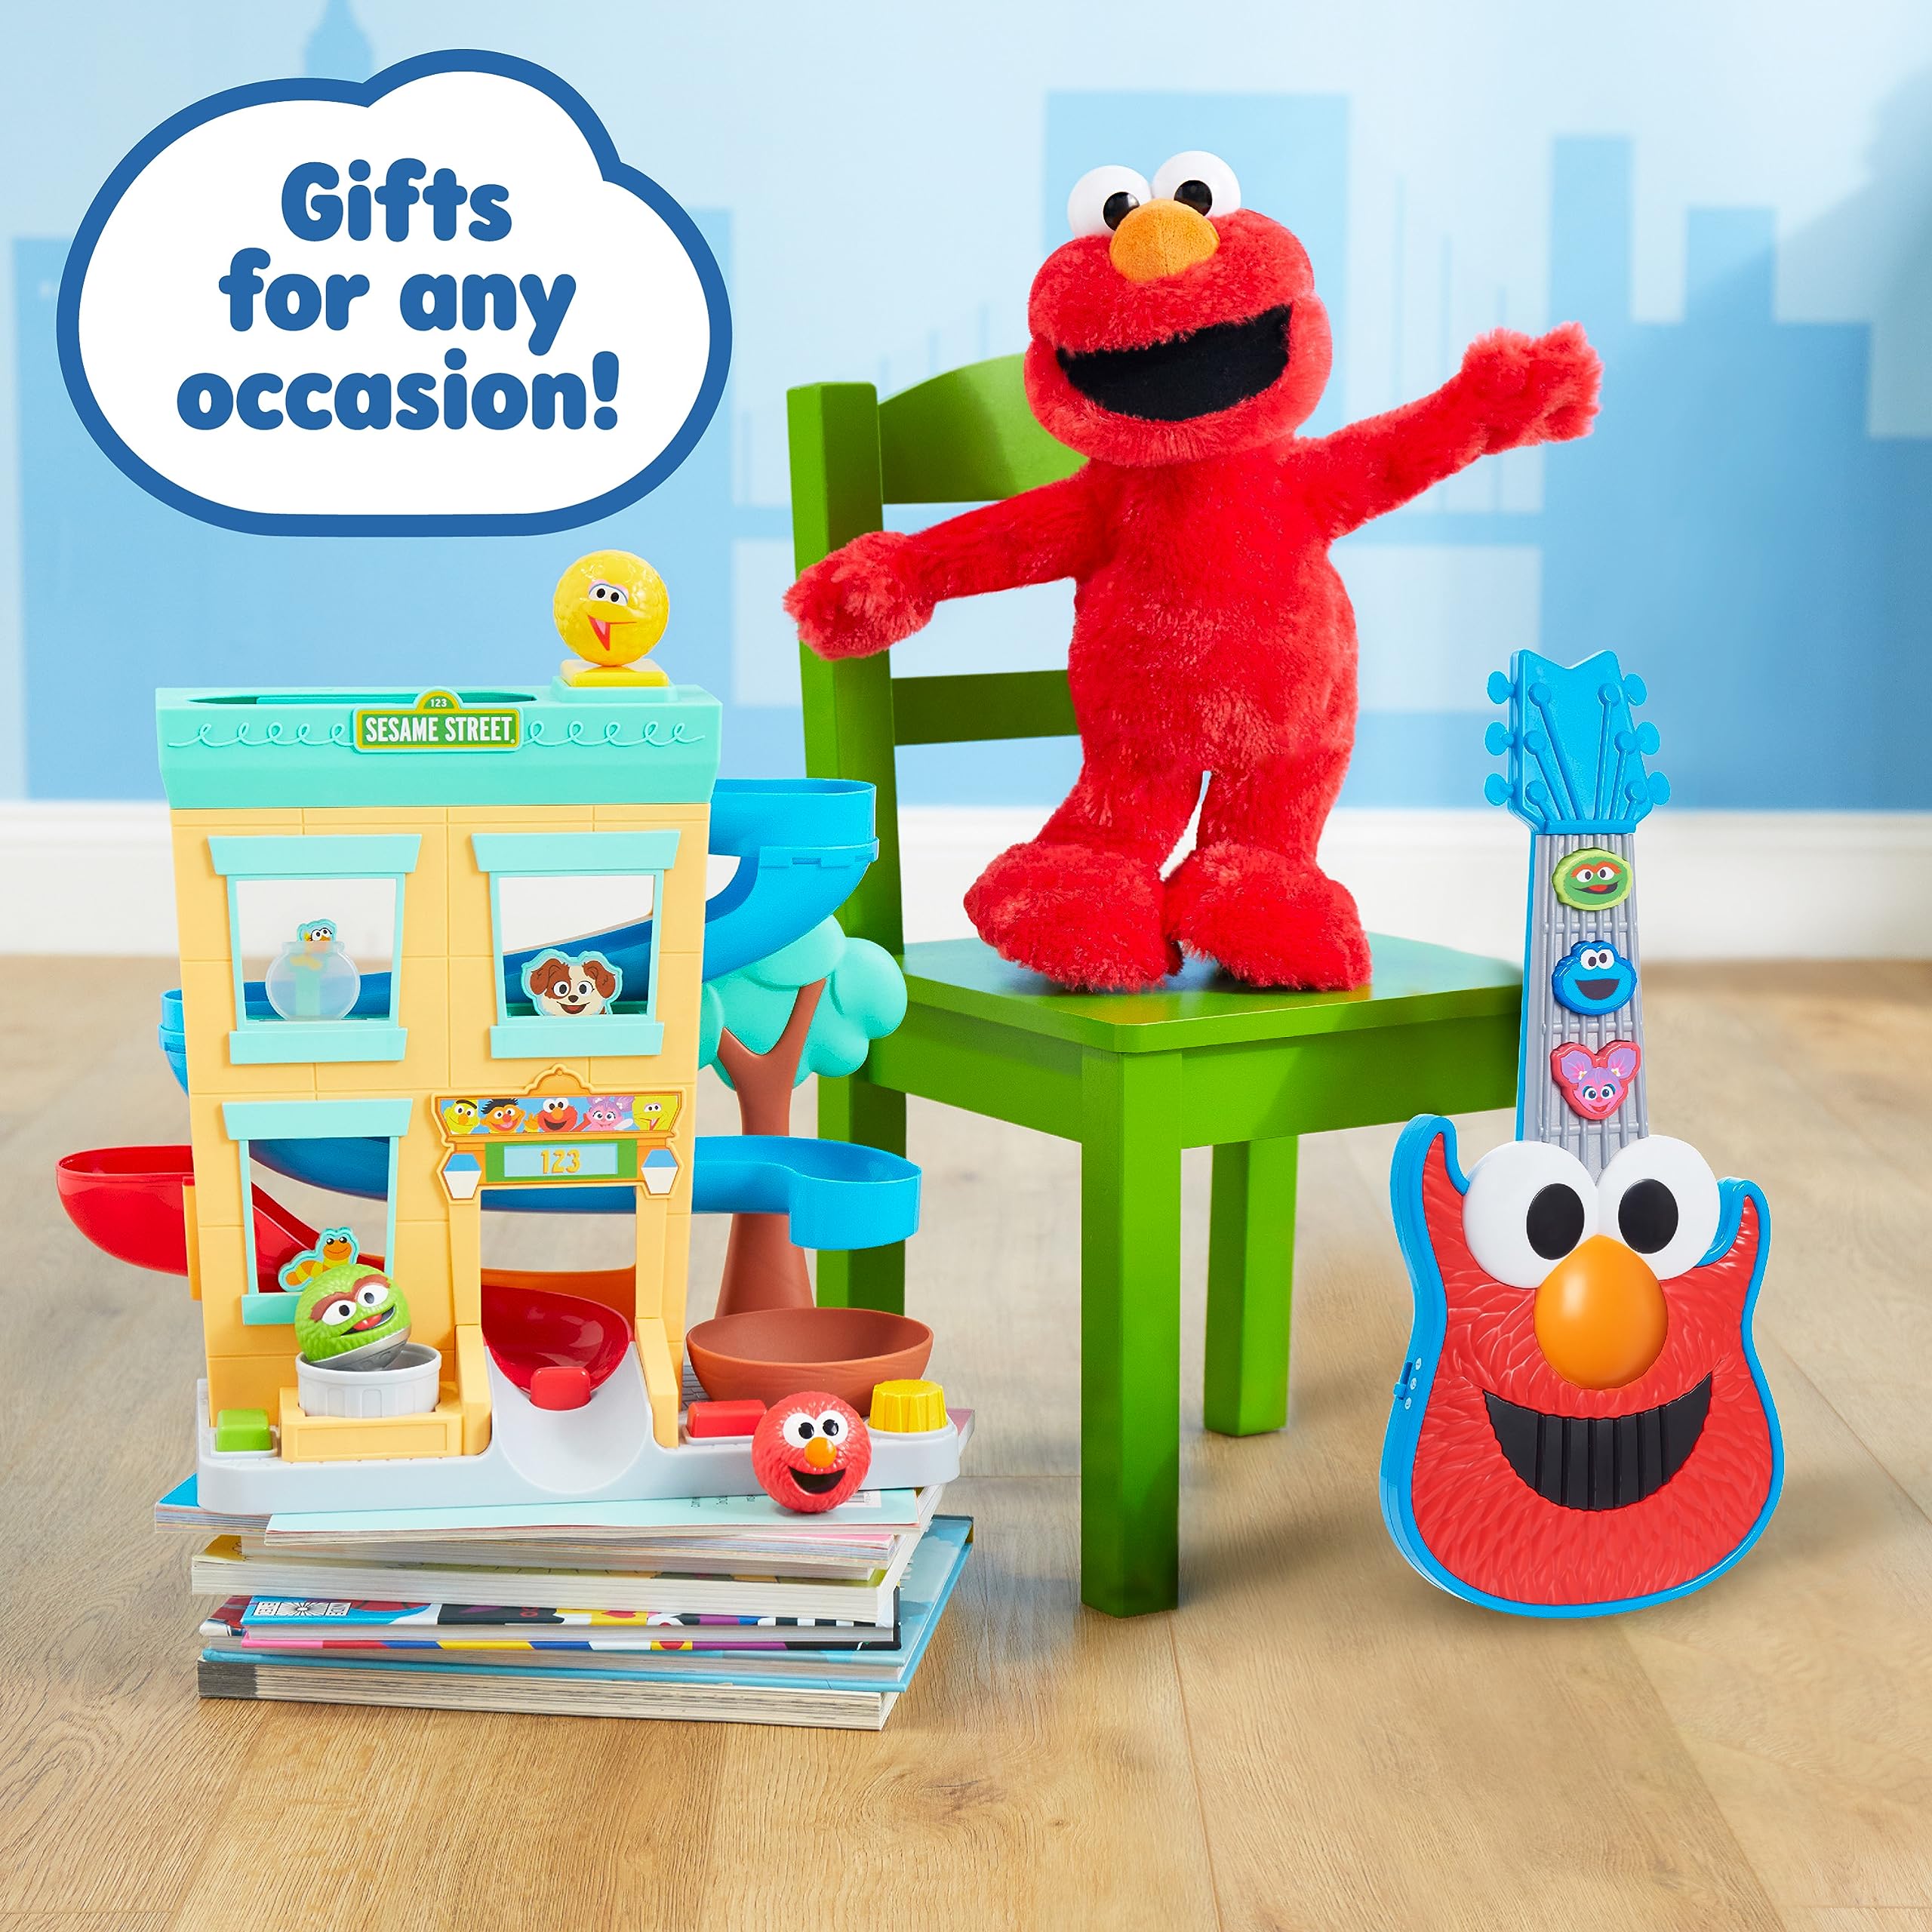 Sesame Street 'Round The Neighborhood 4-Piece Ball Drop Playset and Figures, Officially Licensed Kids Toys for Ages 12 Month by Just Play